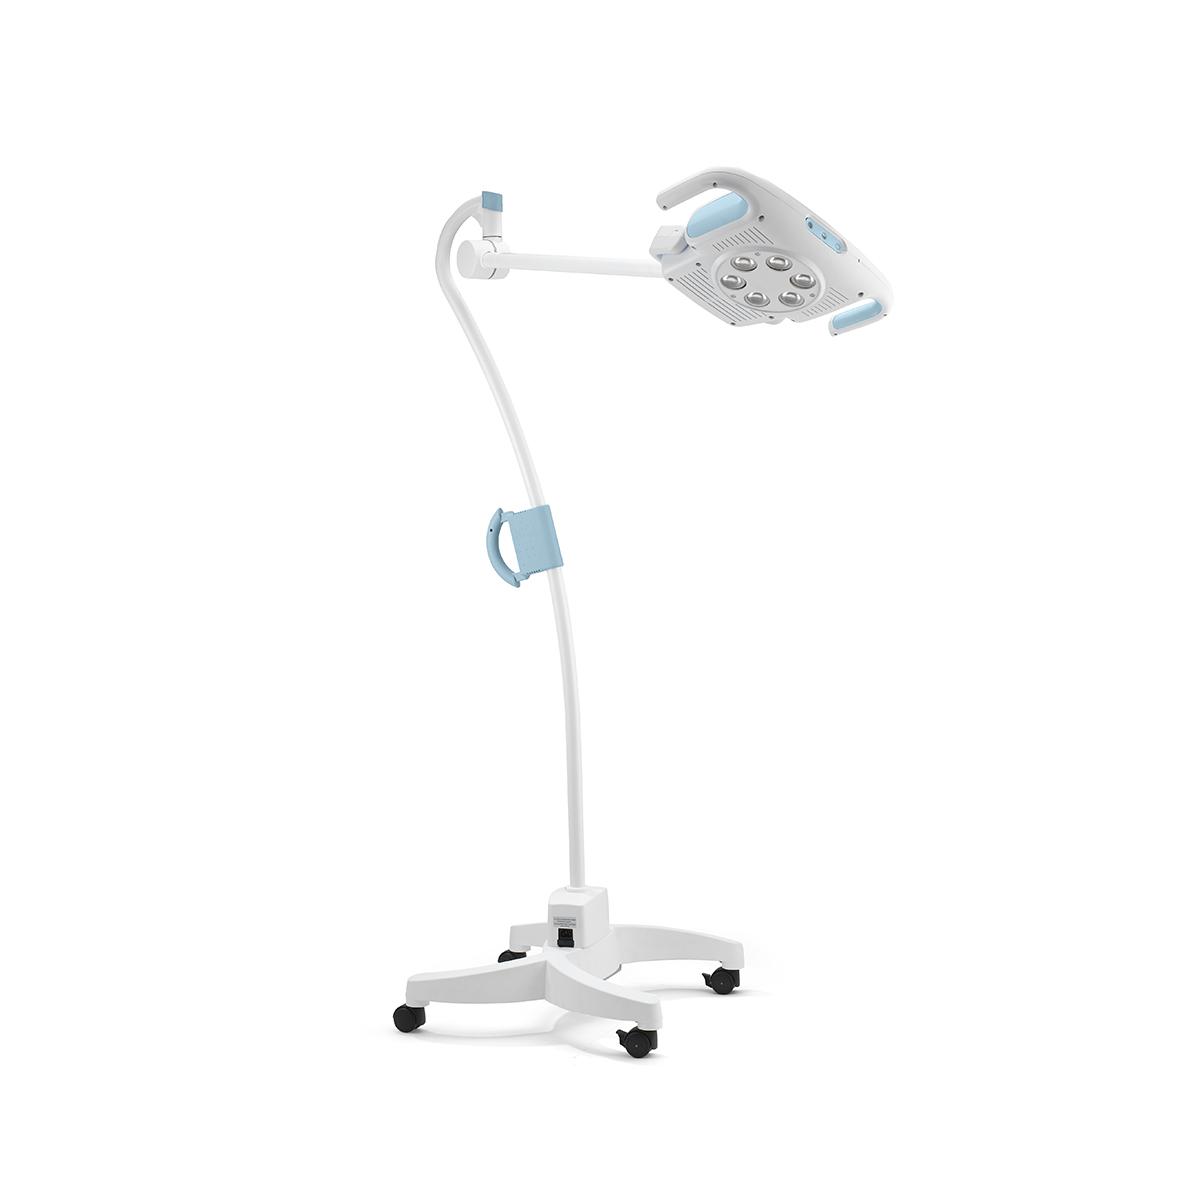 Green Series 900 Procedure Light full view on rolling stand